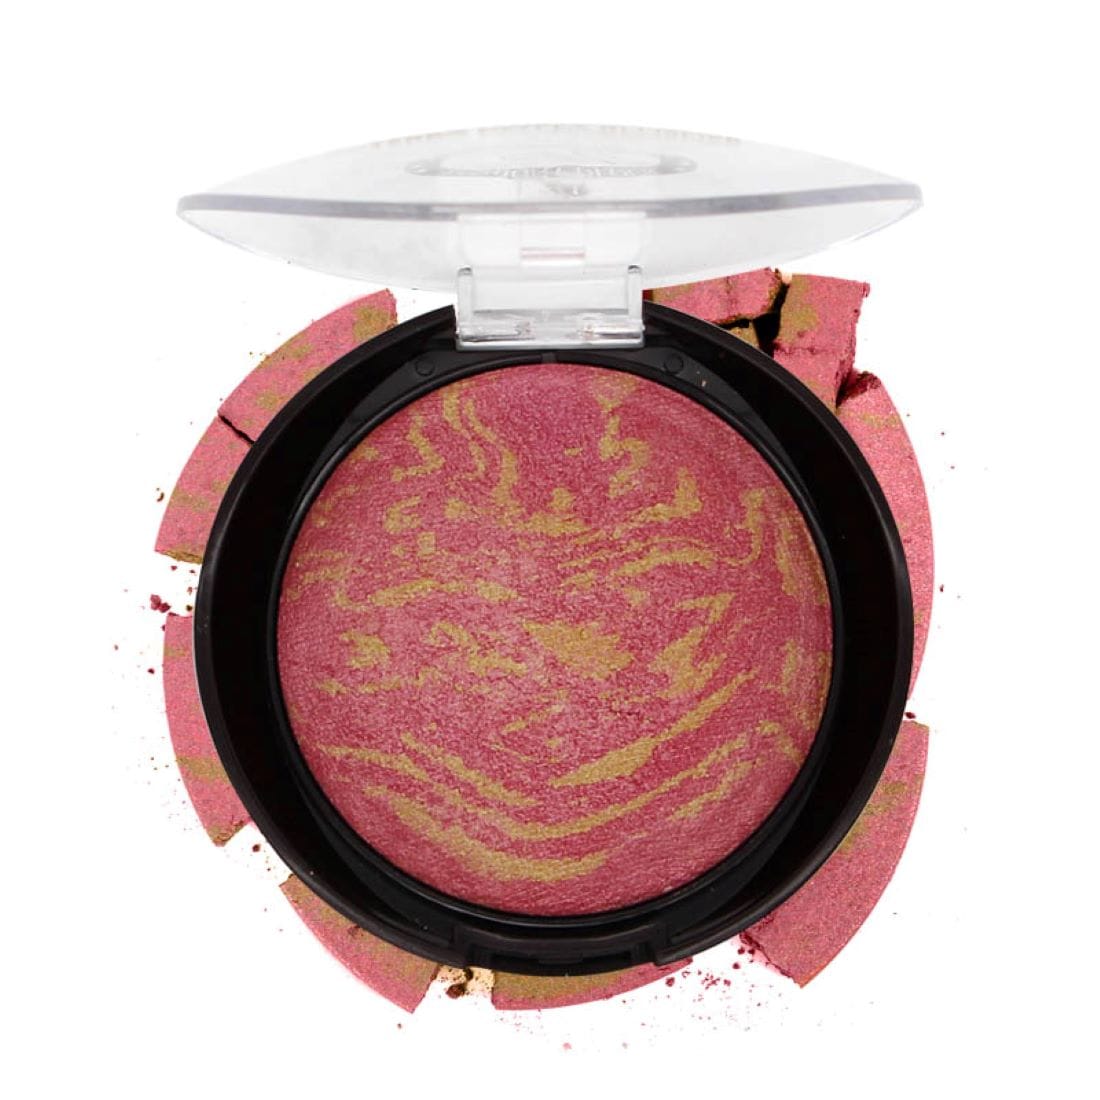 Waterproof Tera Cotta BlusherThe intensely pigmented blush that adds a pop of color to the cheeks Lightweight formula for a comfortable wear Easy to blend formula for a naturally flushed look This professional blusher has an easily blendable formula that can flatter any skin tone complete your makeup look with this lightweight Fashion Colour Blusher that gives you comfortable wear all day long.